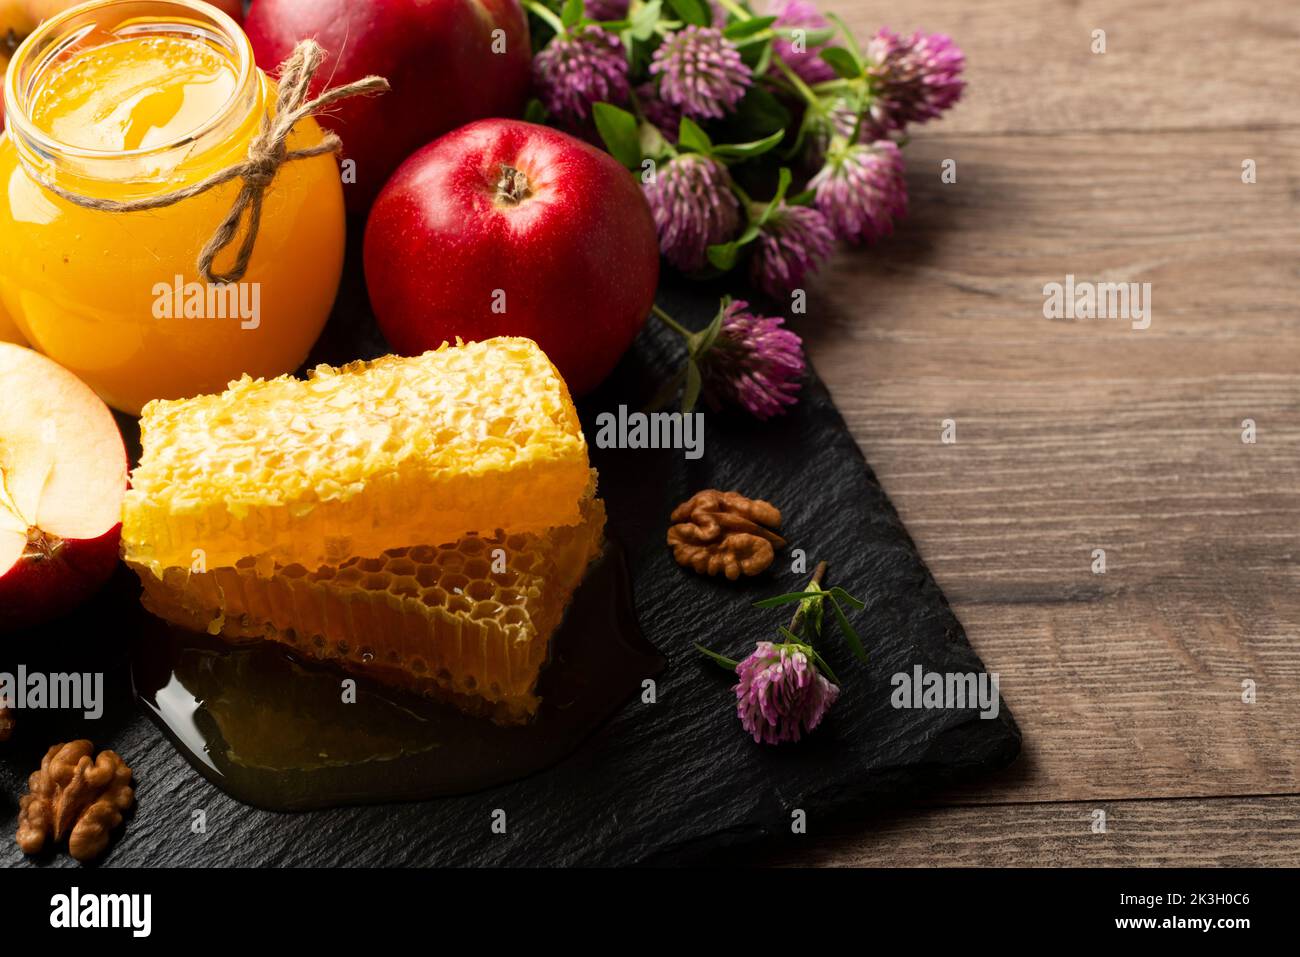 Mason jar with honey, honeycomb, red apples and walnuts on kitchen table Stock Photo